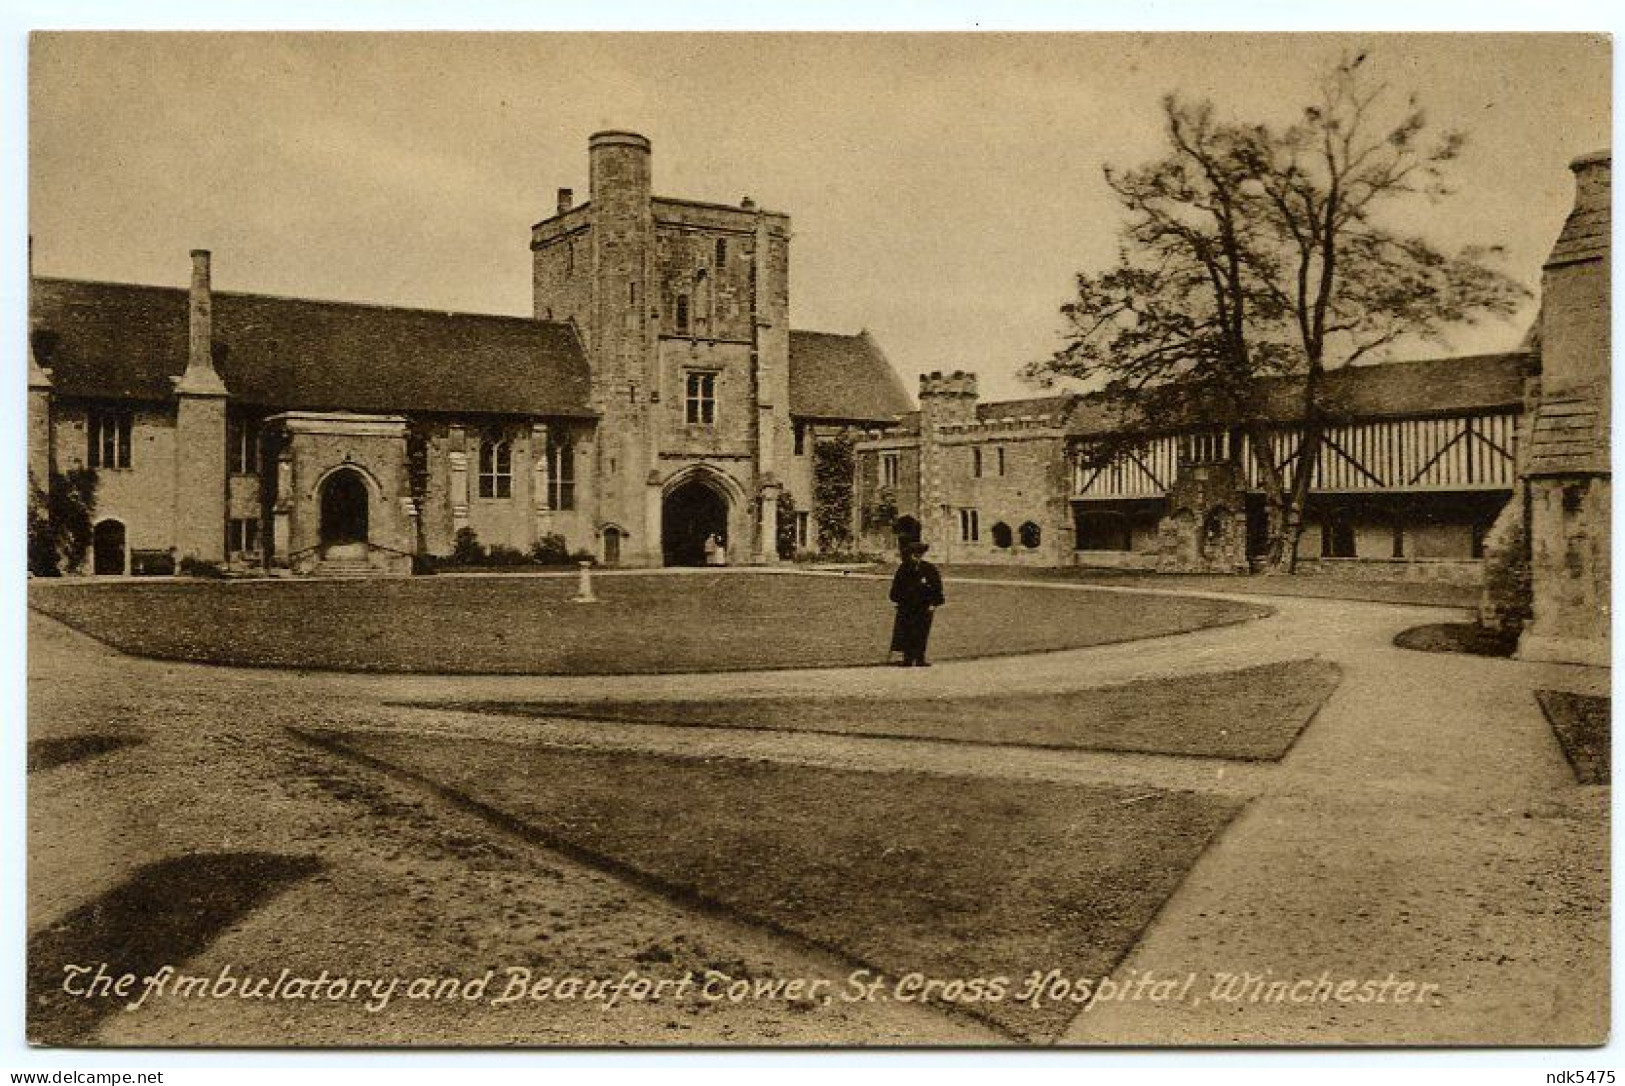 WINCHESTER : THE AMBULATORY AND BEAUFORT TOWER, ST. CROSS HOSPITAL - Winchester